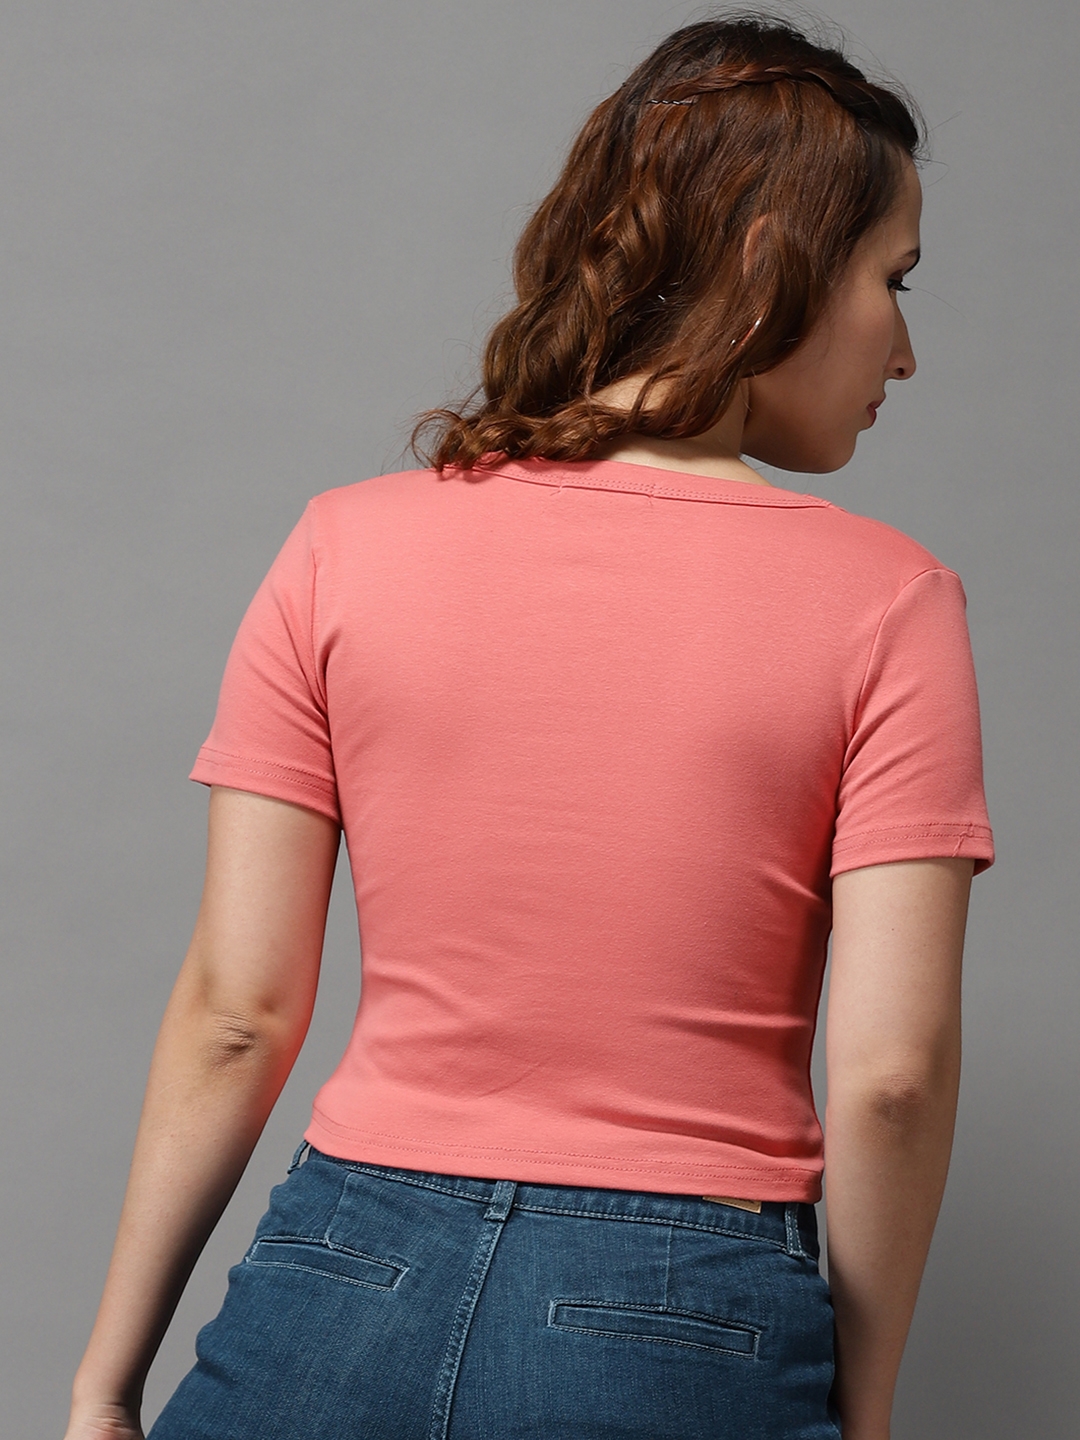 Women's Pink Cotton Blend Solid Tops